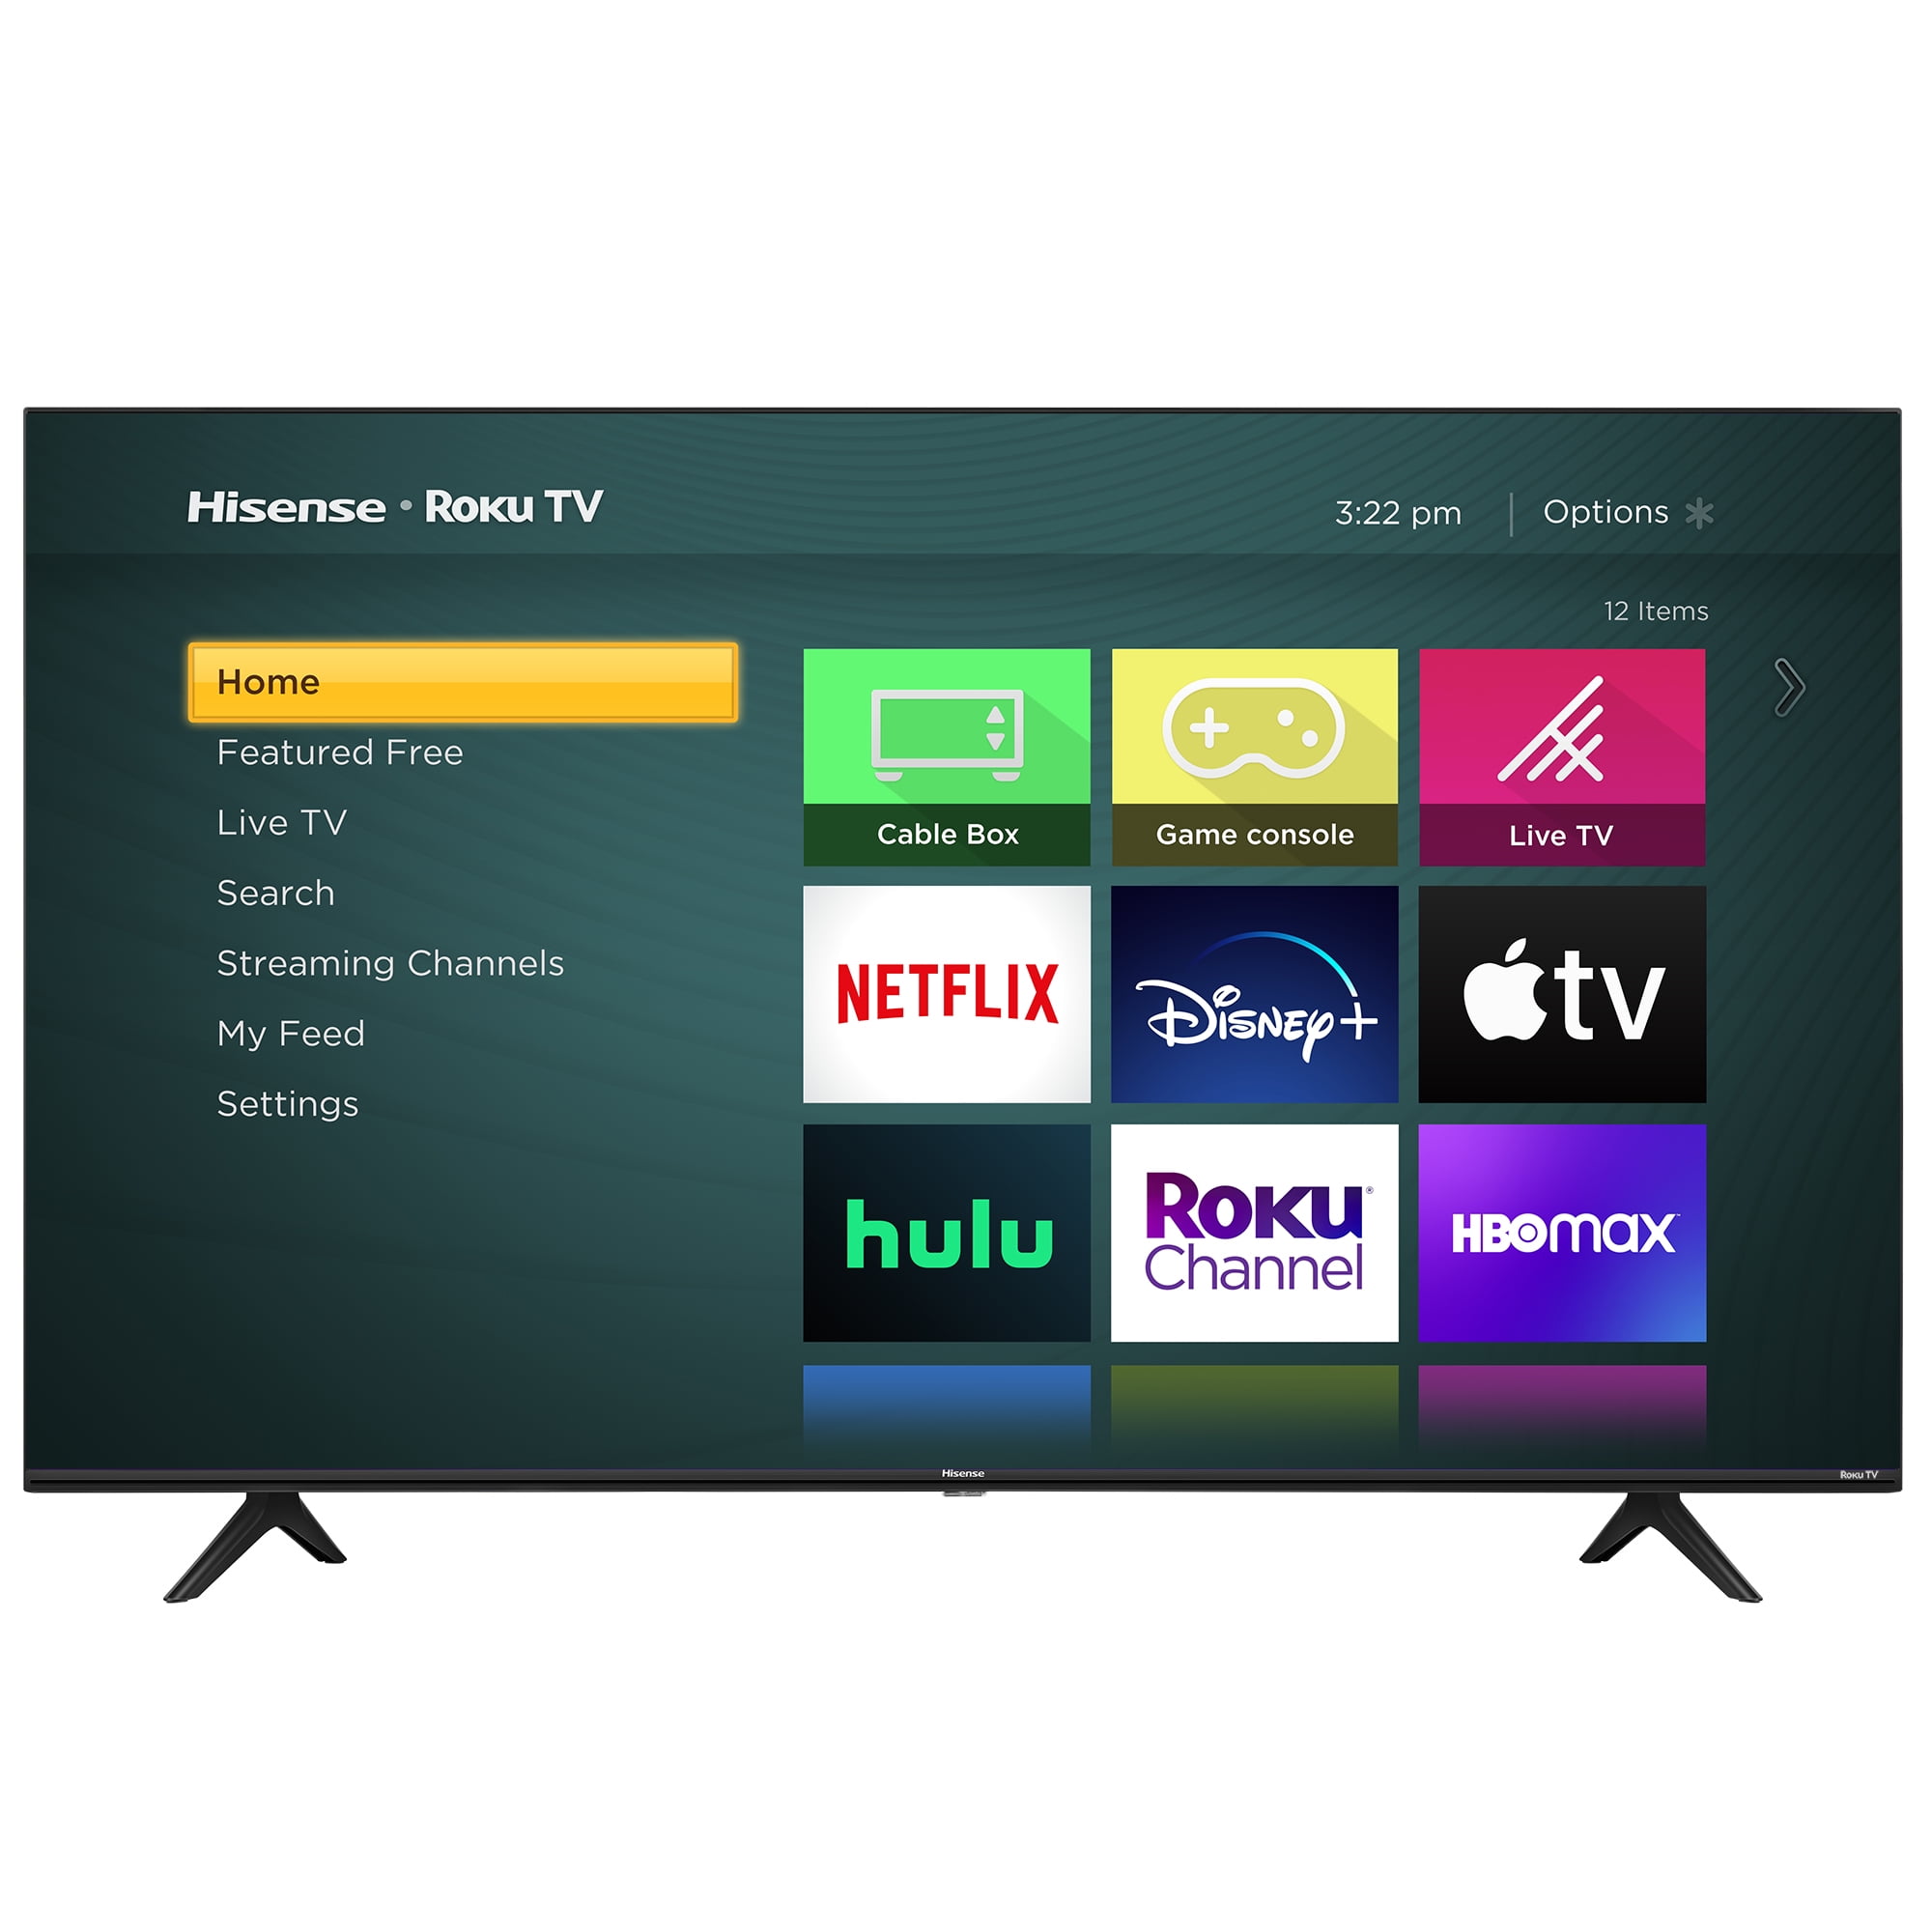 Hisense 65-Inch Class R6 Series Dolby Vision HDR 4K UHD Roku Smart TV with Alexa Compatibility 65R6G, 2021 Model 